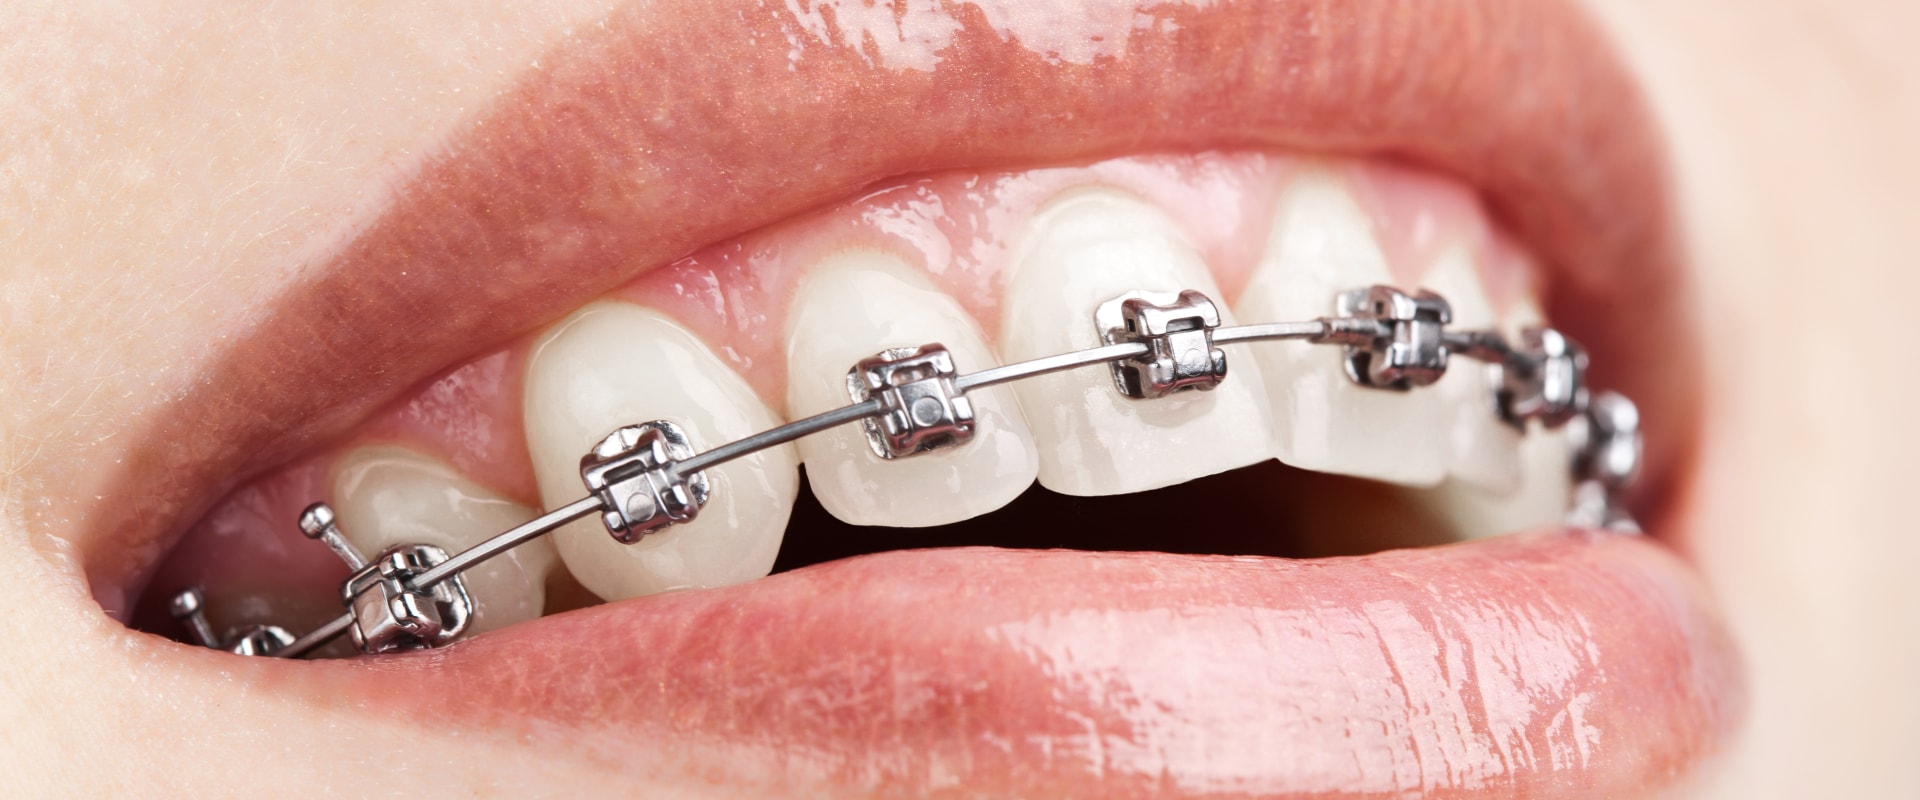 Can Braces Cause Long-Term Damage? - An Expert's Perspective